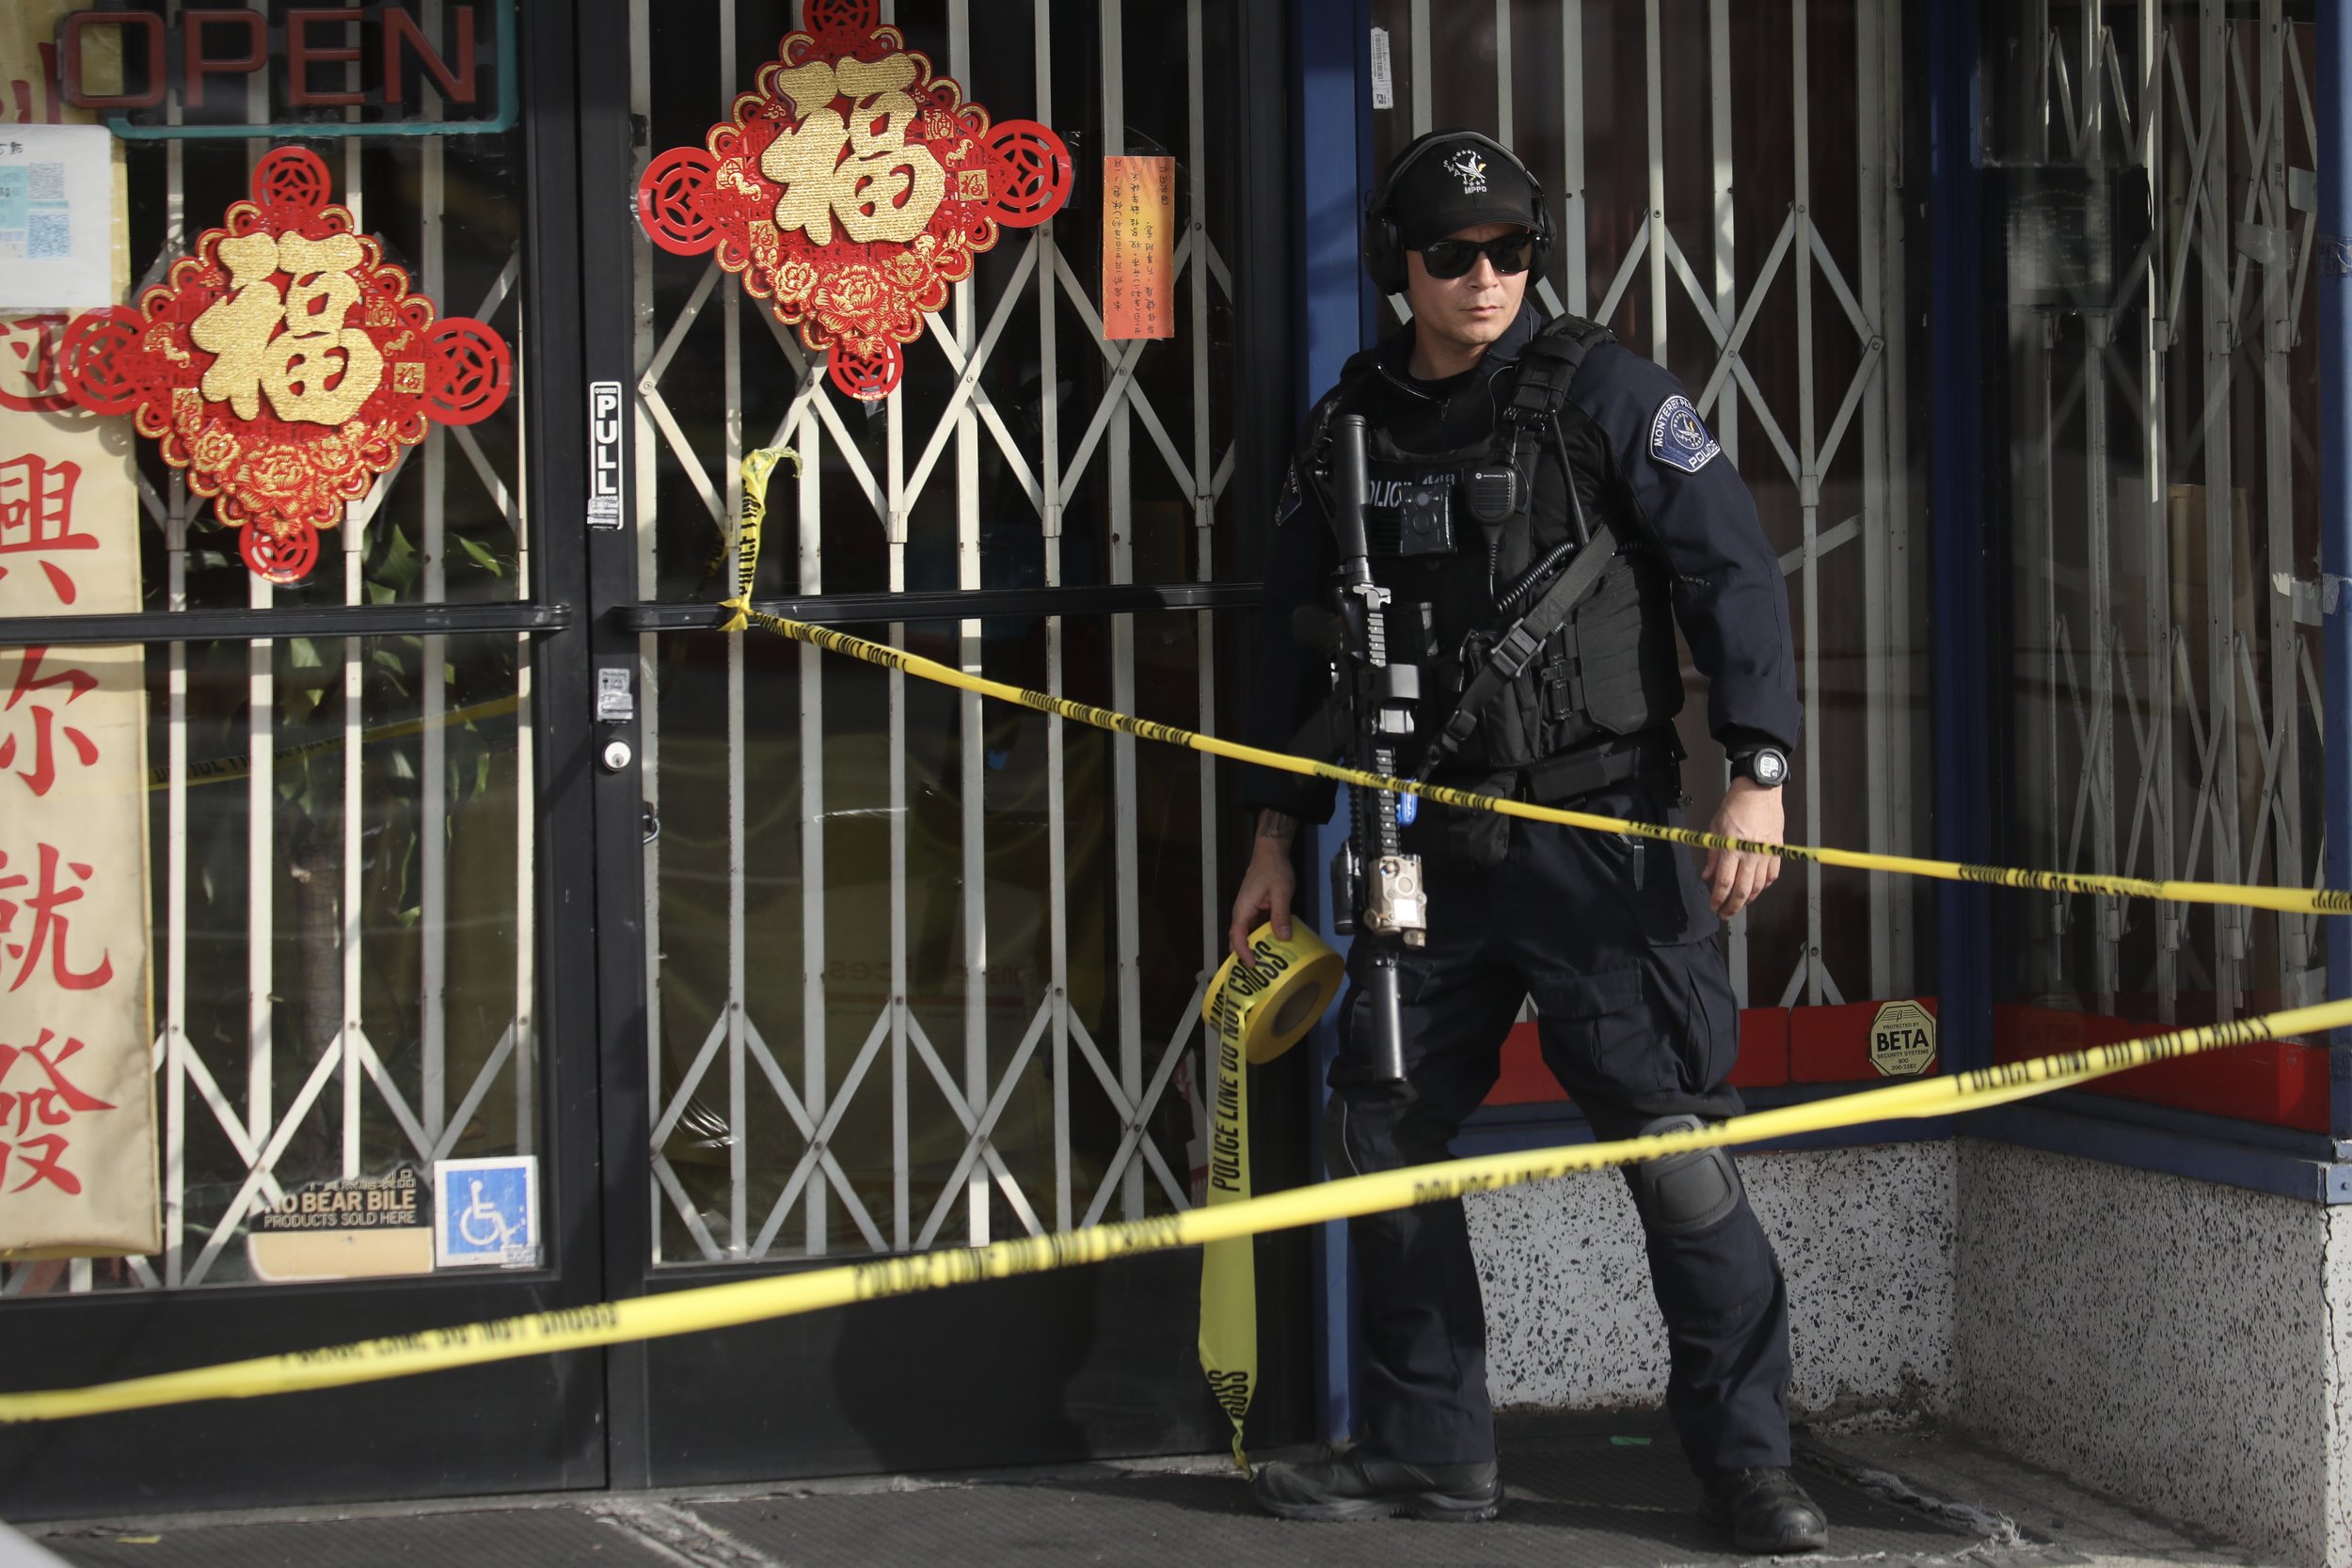  A heavily armed policeman blocks off a sidewalk near the Star Ballroom after a mass shooting during Chinese Lunar New Year celebrations in Monterey Park, California, U.S.  